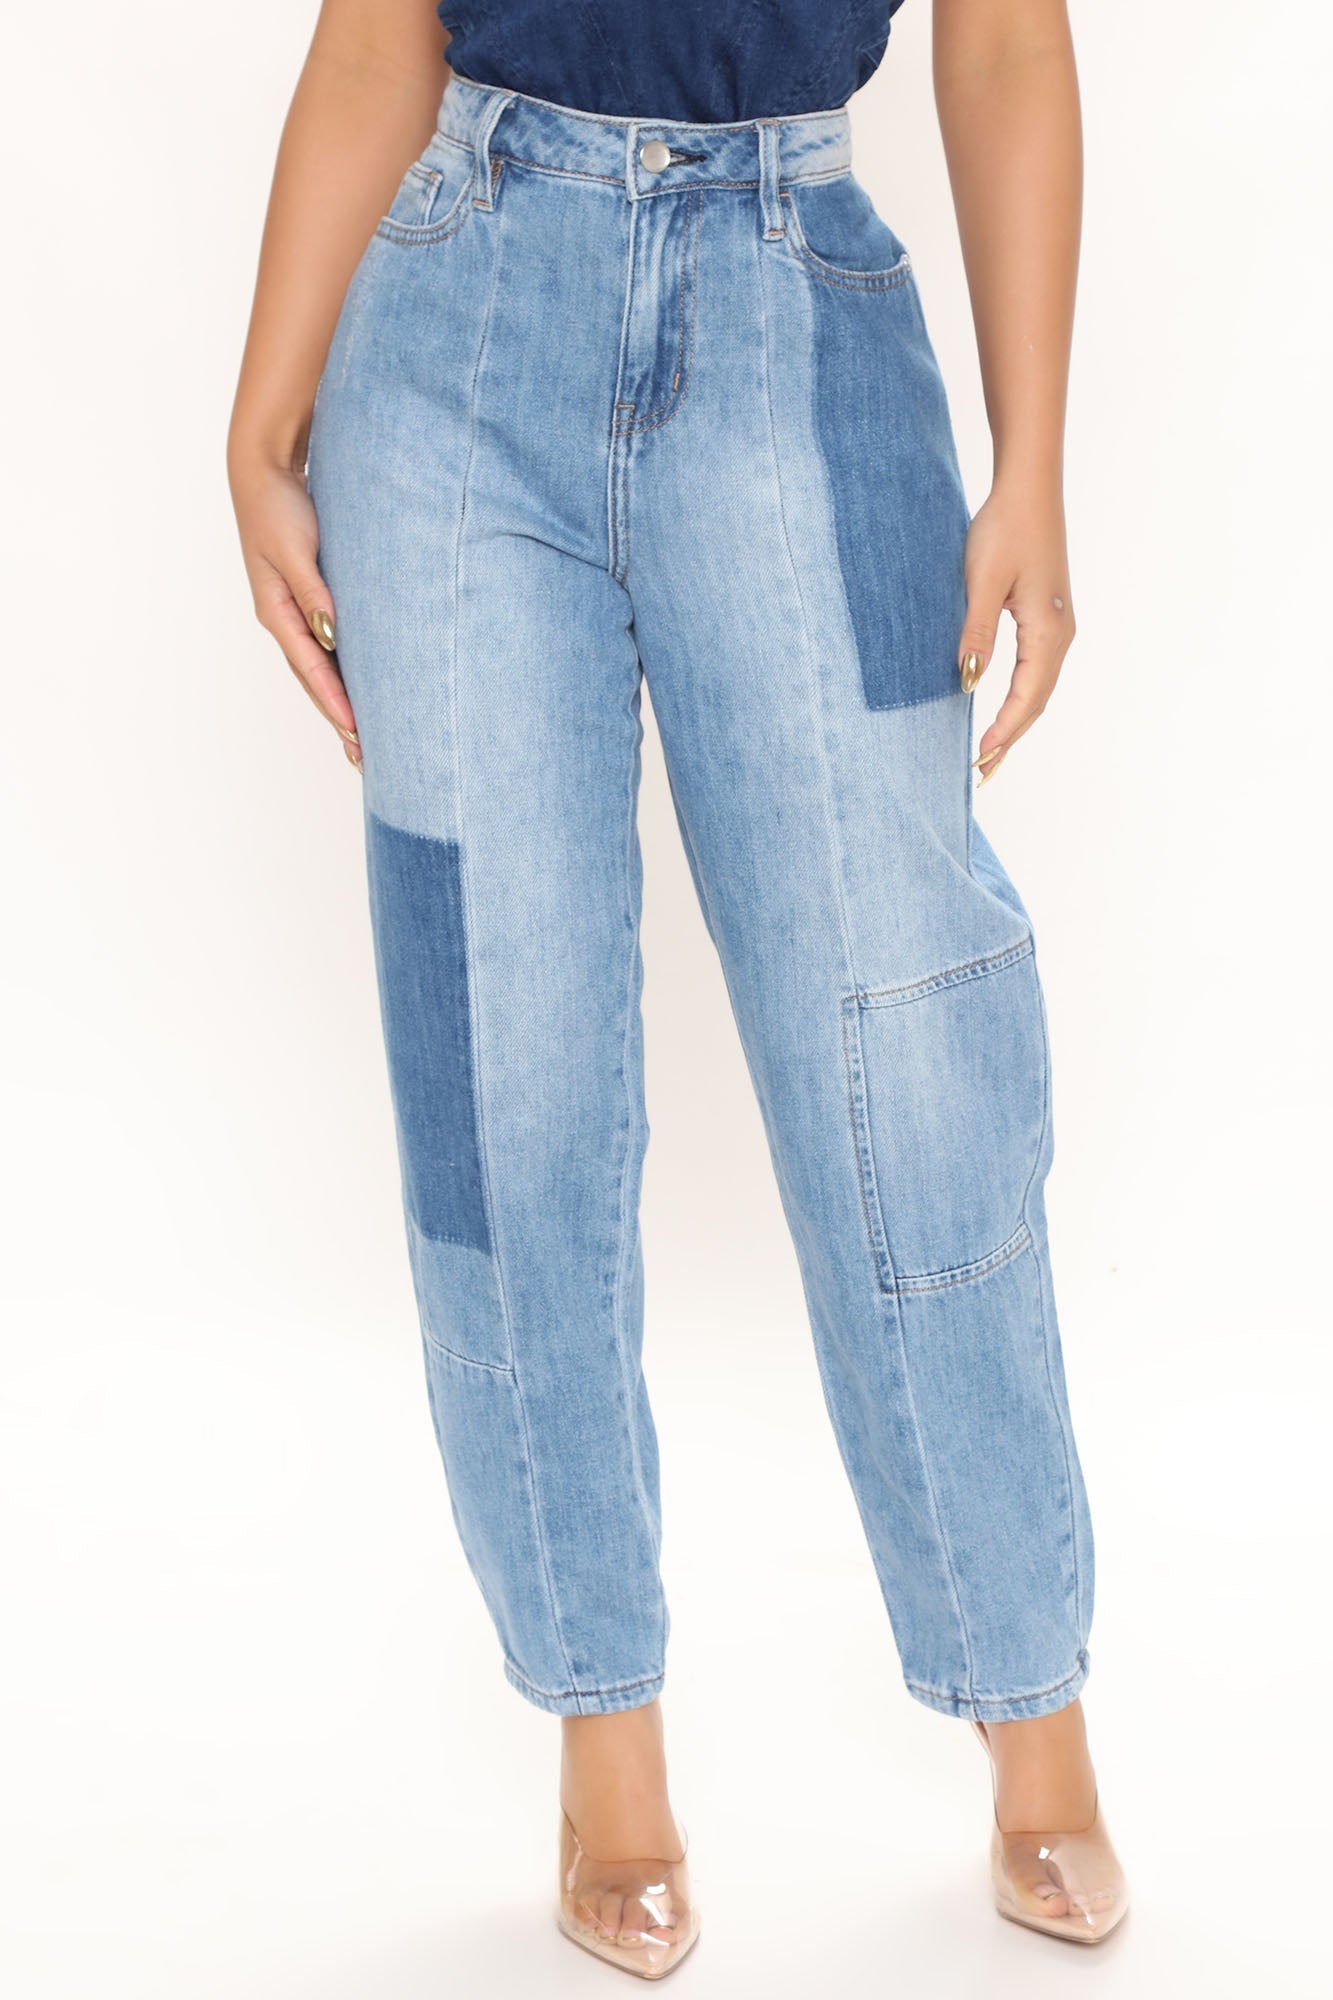 Like A Dream Patchwork Balloon Jeans - Light Blue Wash